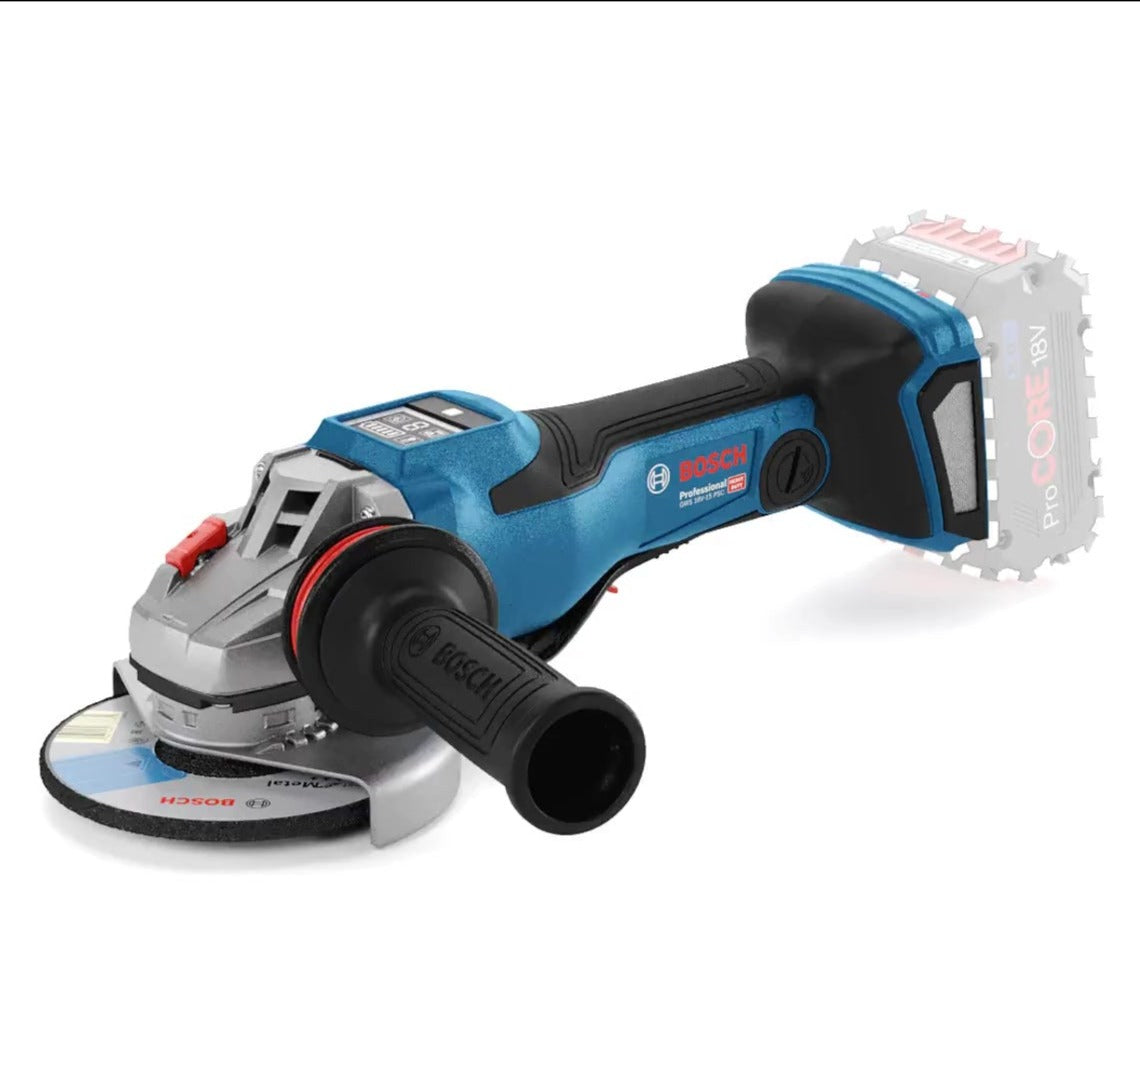 Bosch Professional Cordless Angle Grinder GWS 18V-15 PSC 06019H6B00 Power Tool Services